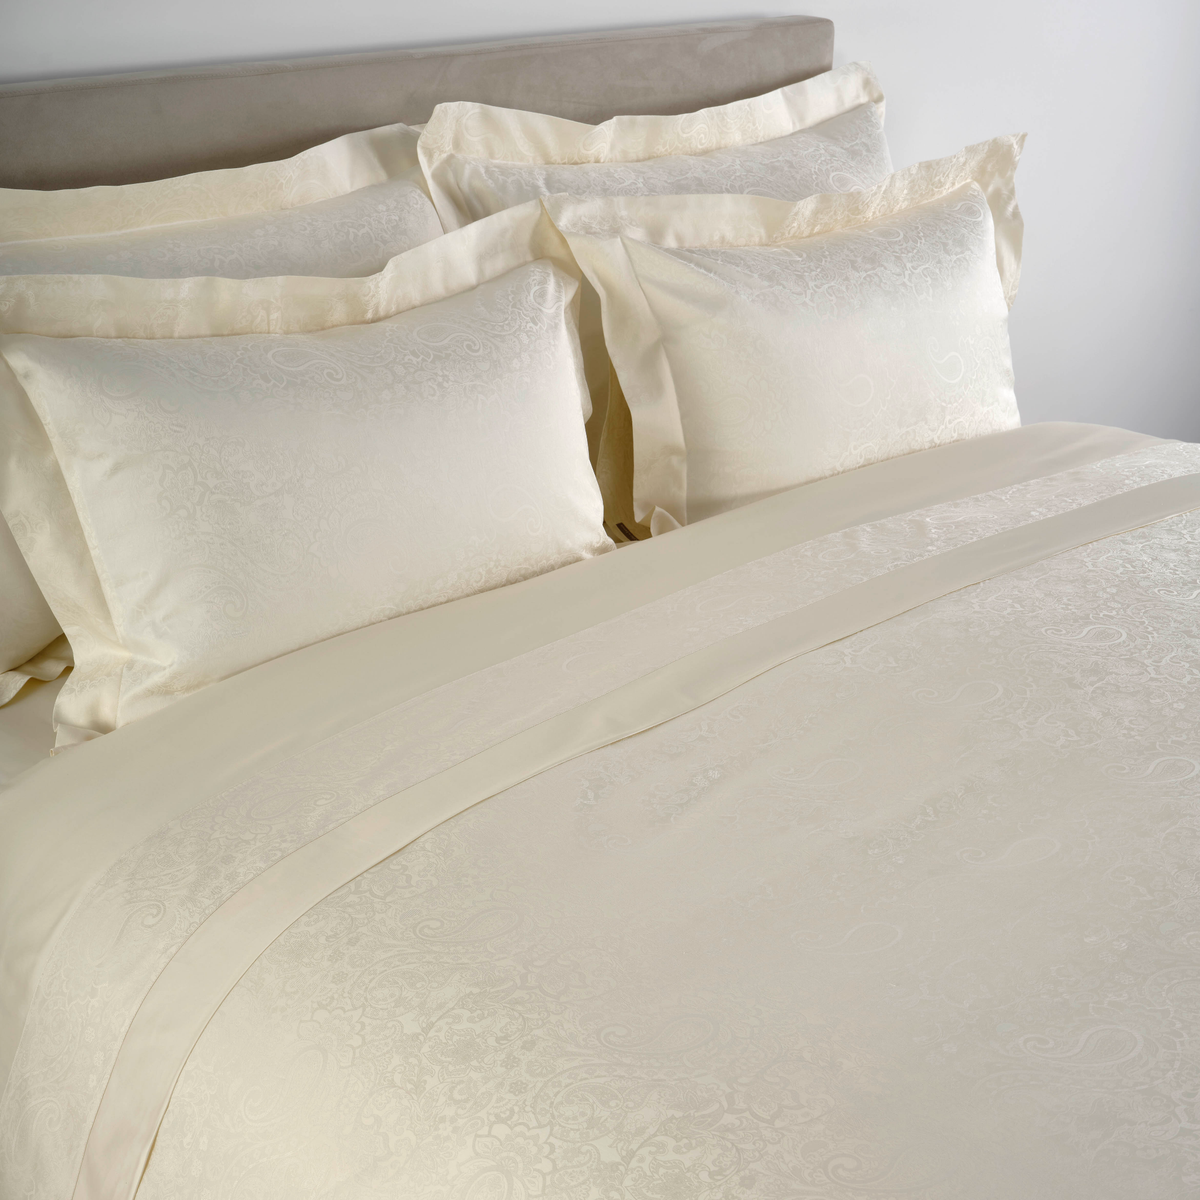 Pillowcases of Celso de Lemos Joanne Collection in Naturel Color